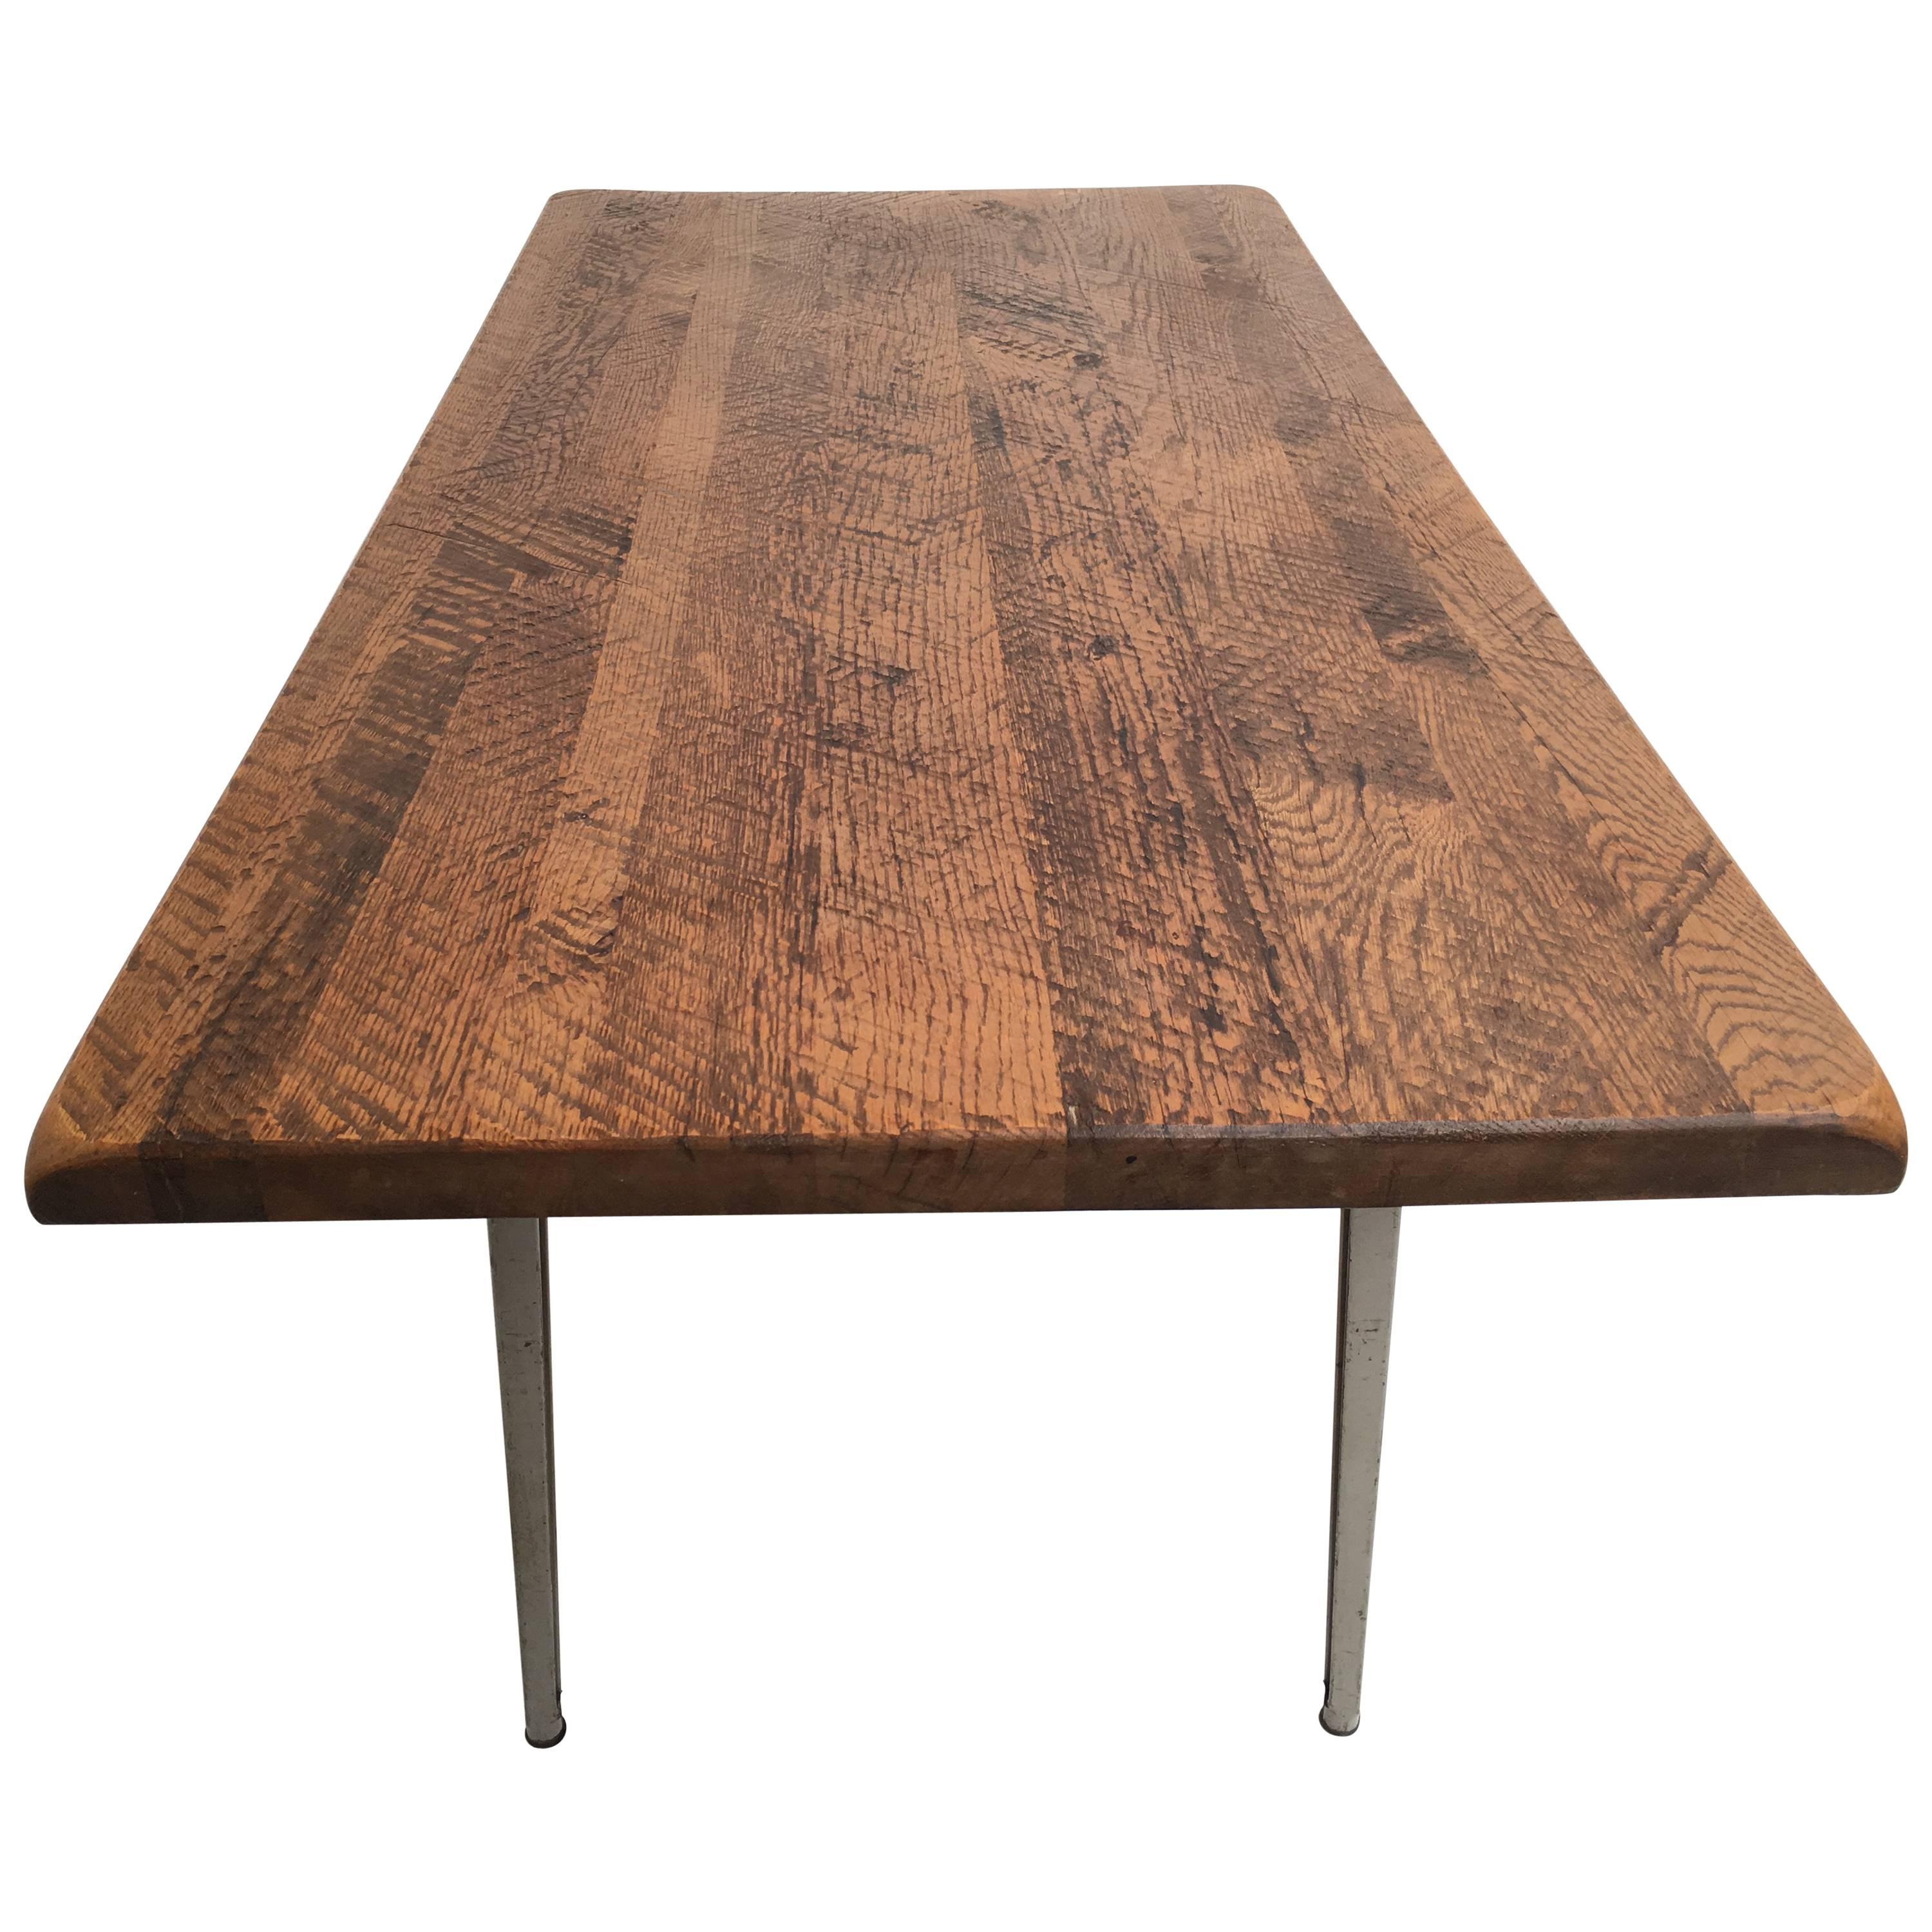 A reclaimed vintage rustic solid oak top has been mounted on a Friso Kramer 'Reform' table frame 

The Reform table was designed by Friso Kramer for Ahrend/De Cirkel to match with his famous revolt chair that was first introduced in 1953

Friso